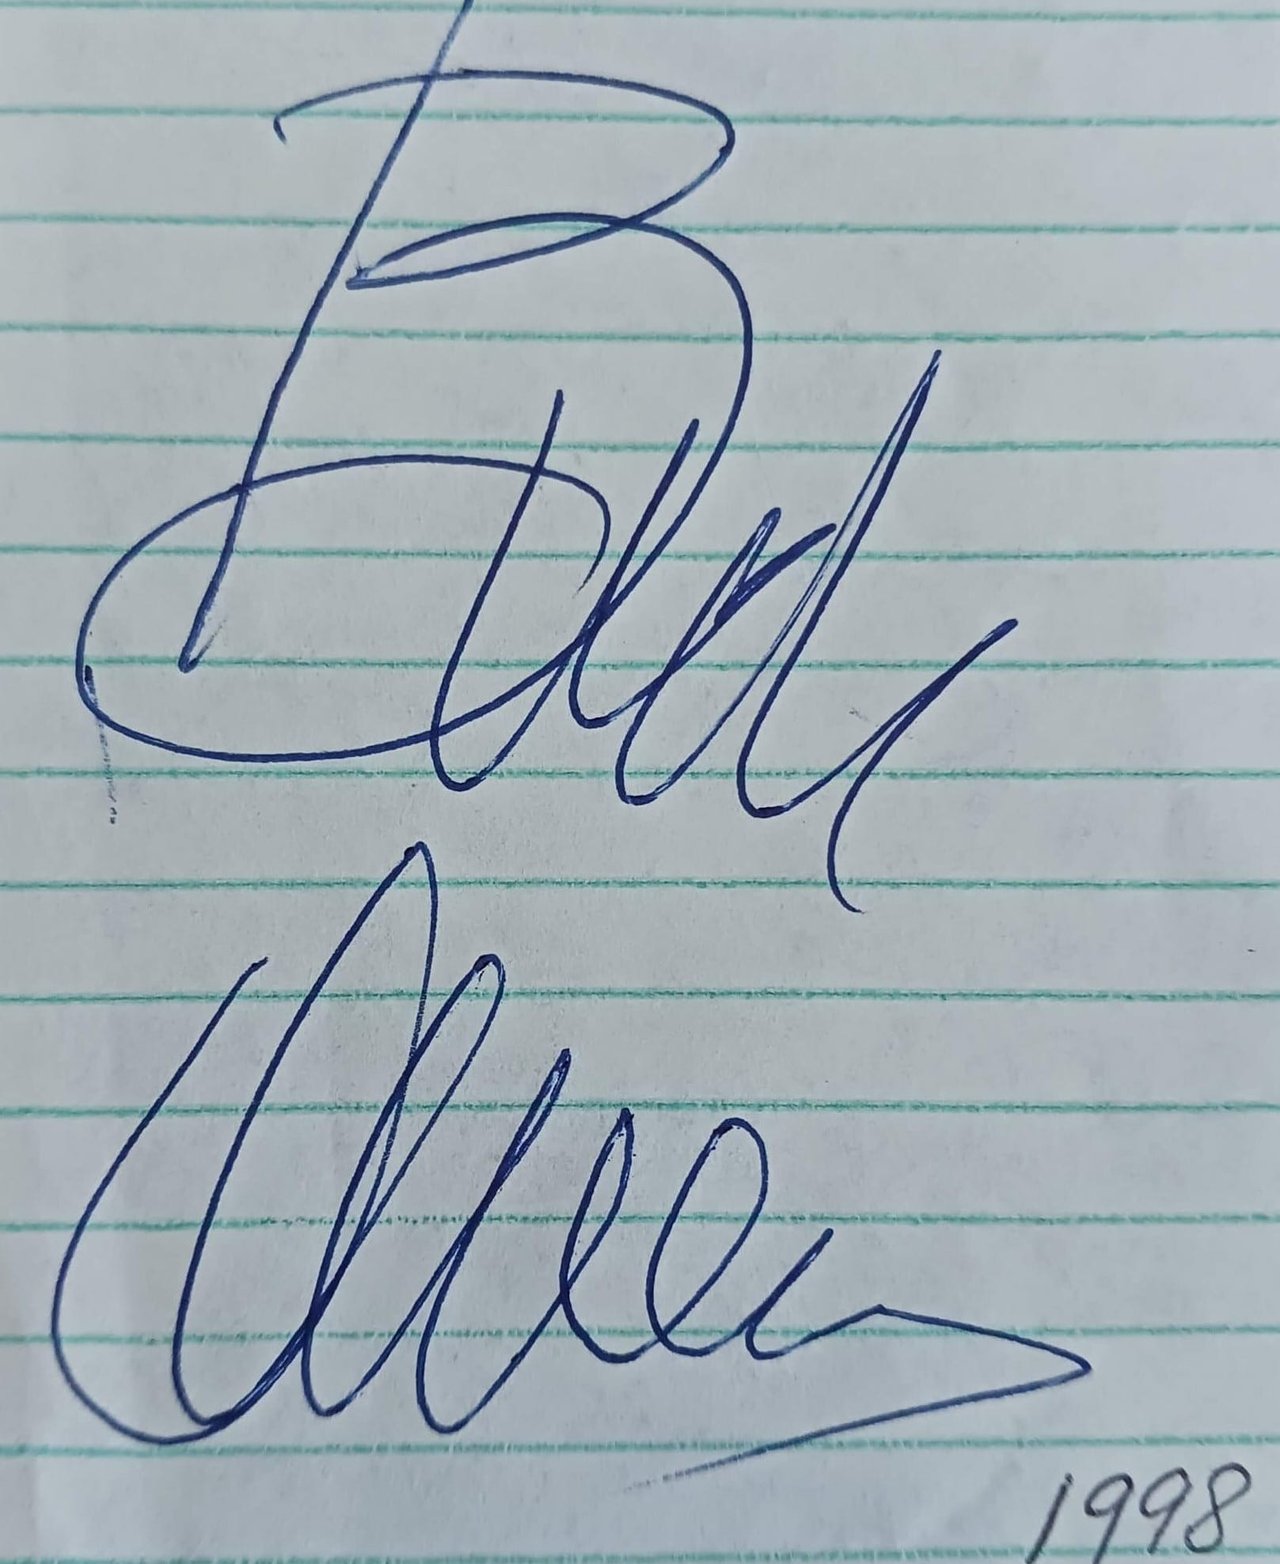 Autograph in a notepad.